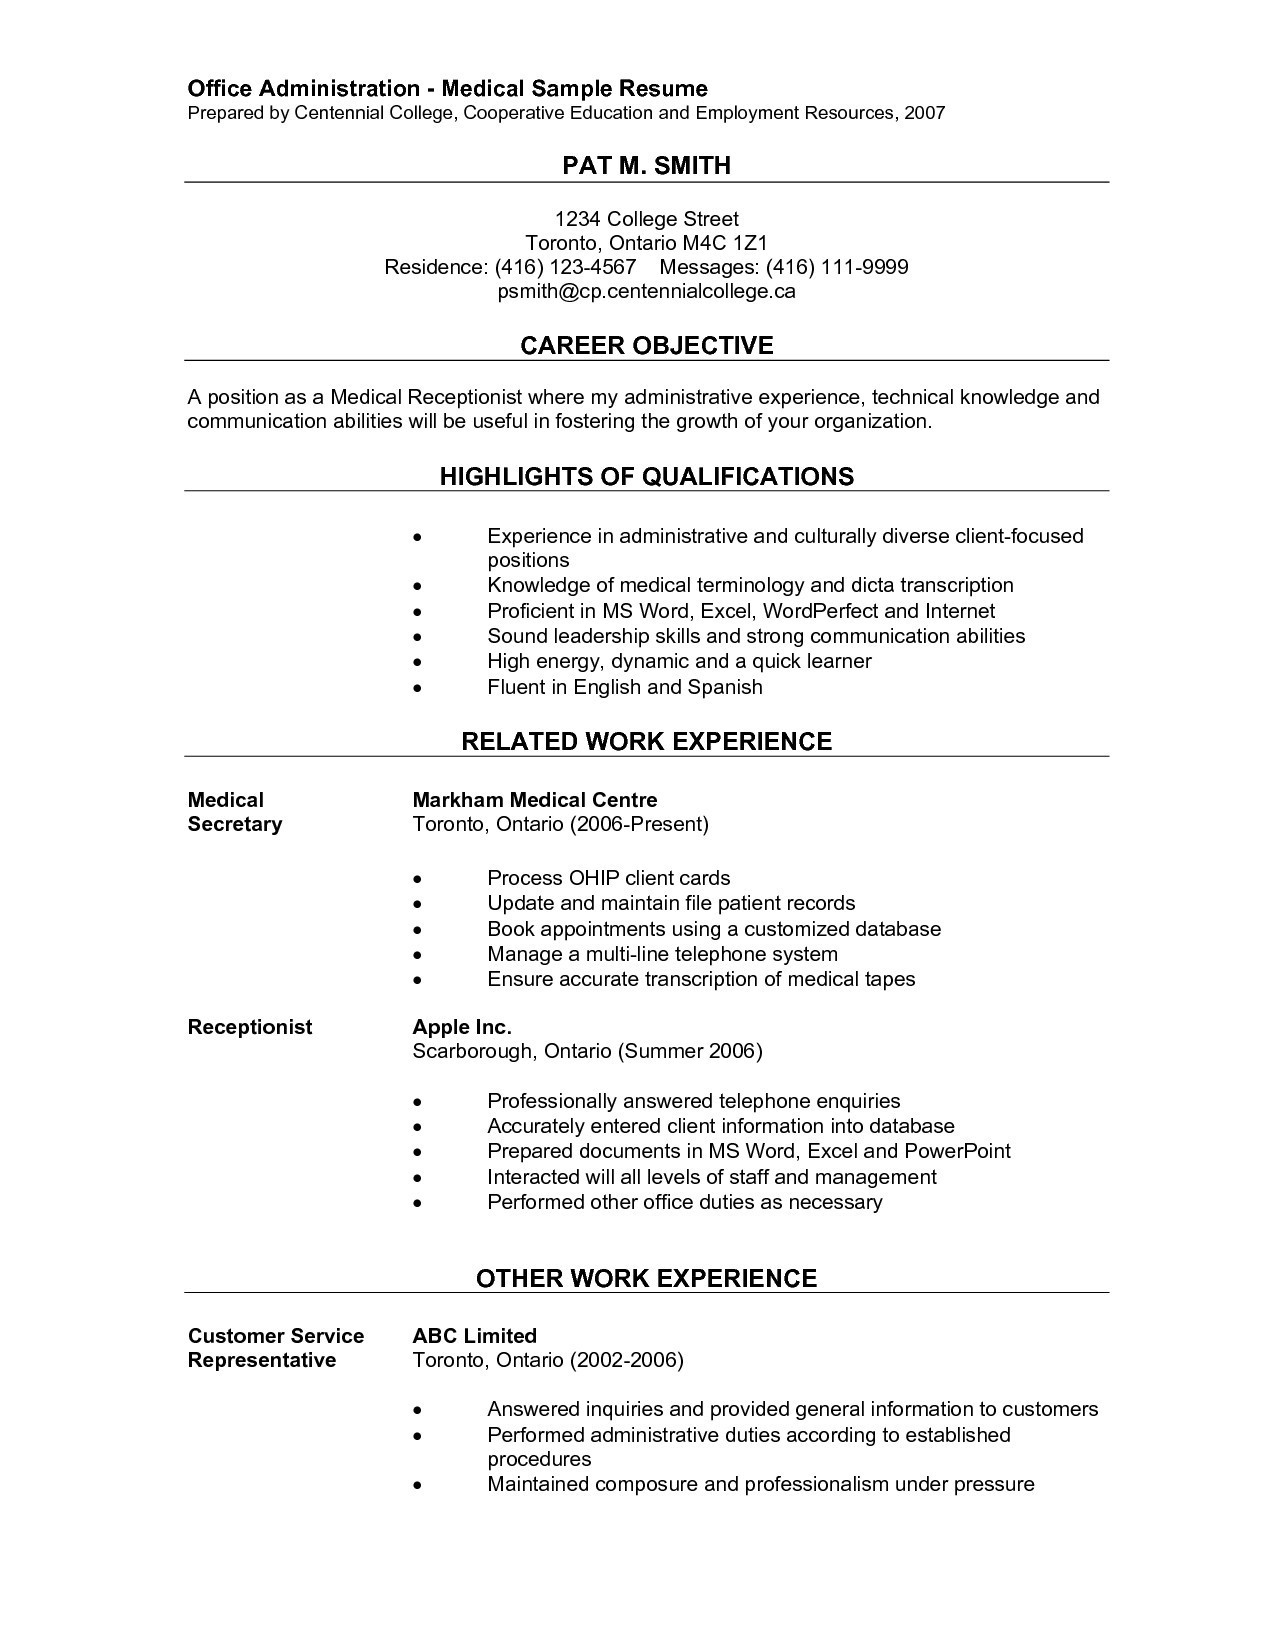 Resume Examples Office  Resume Samples Office Manager New Medical Fice Manager Resume